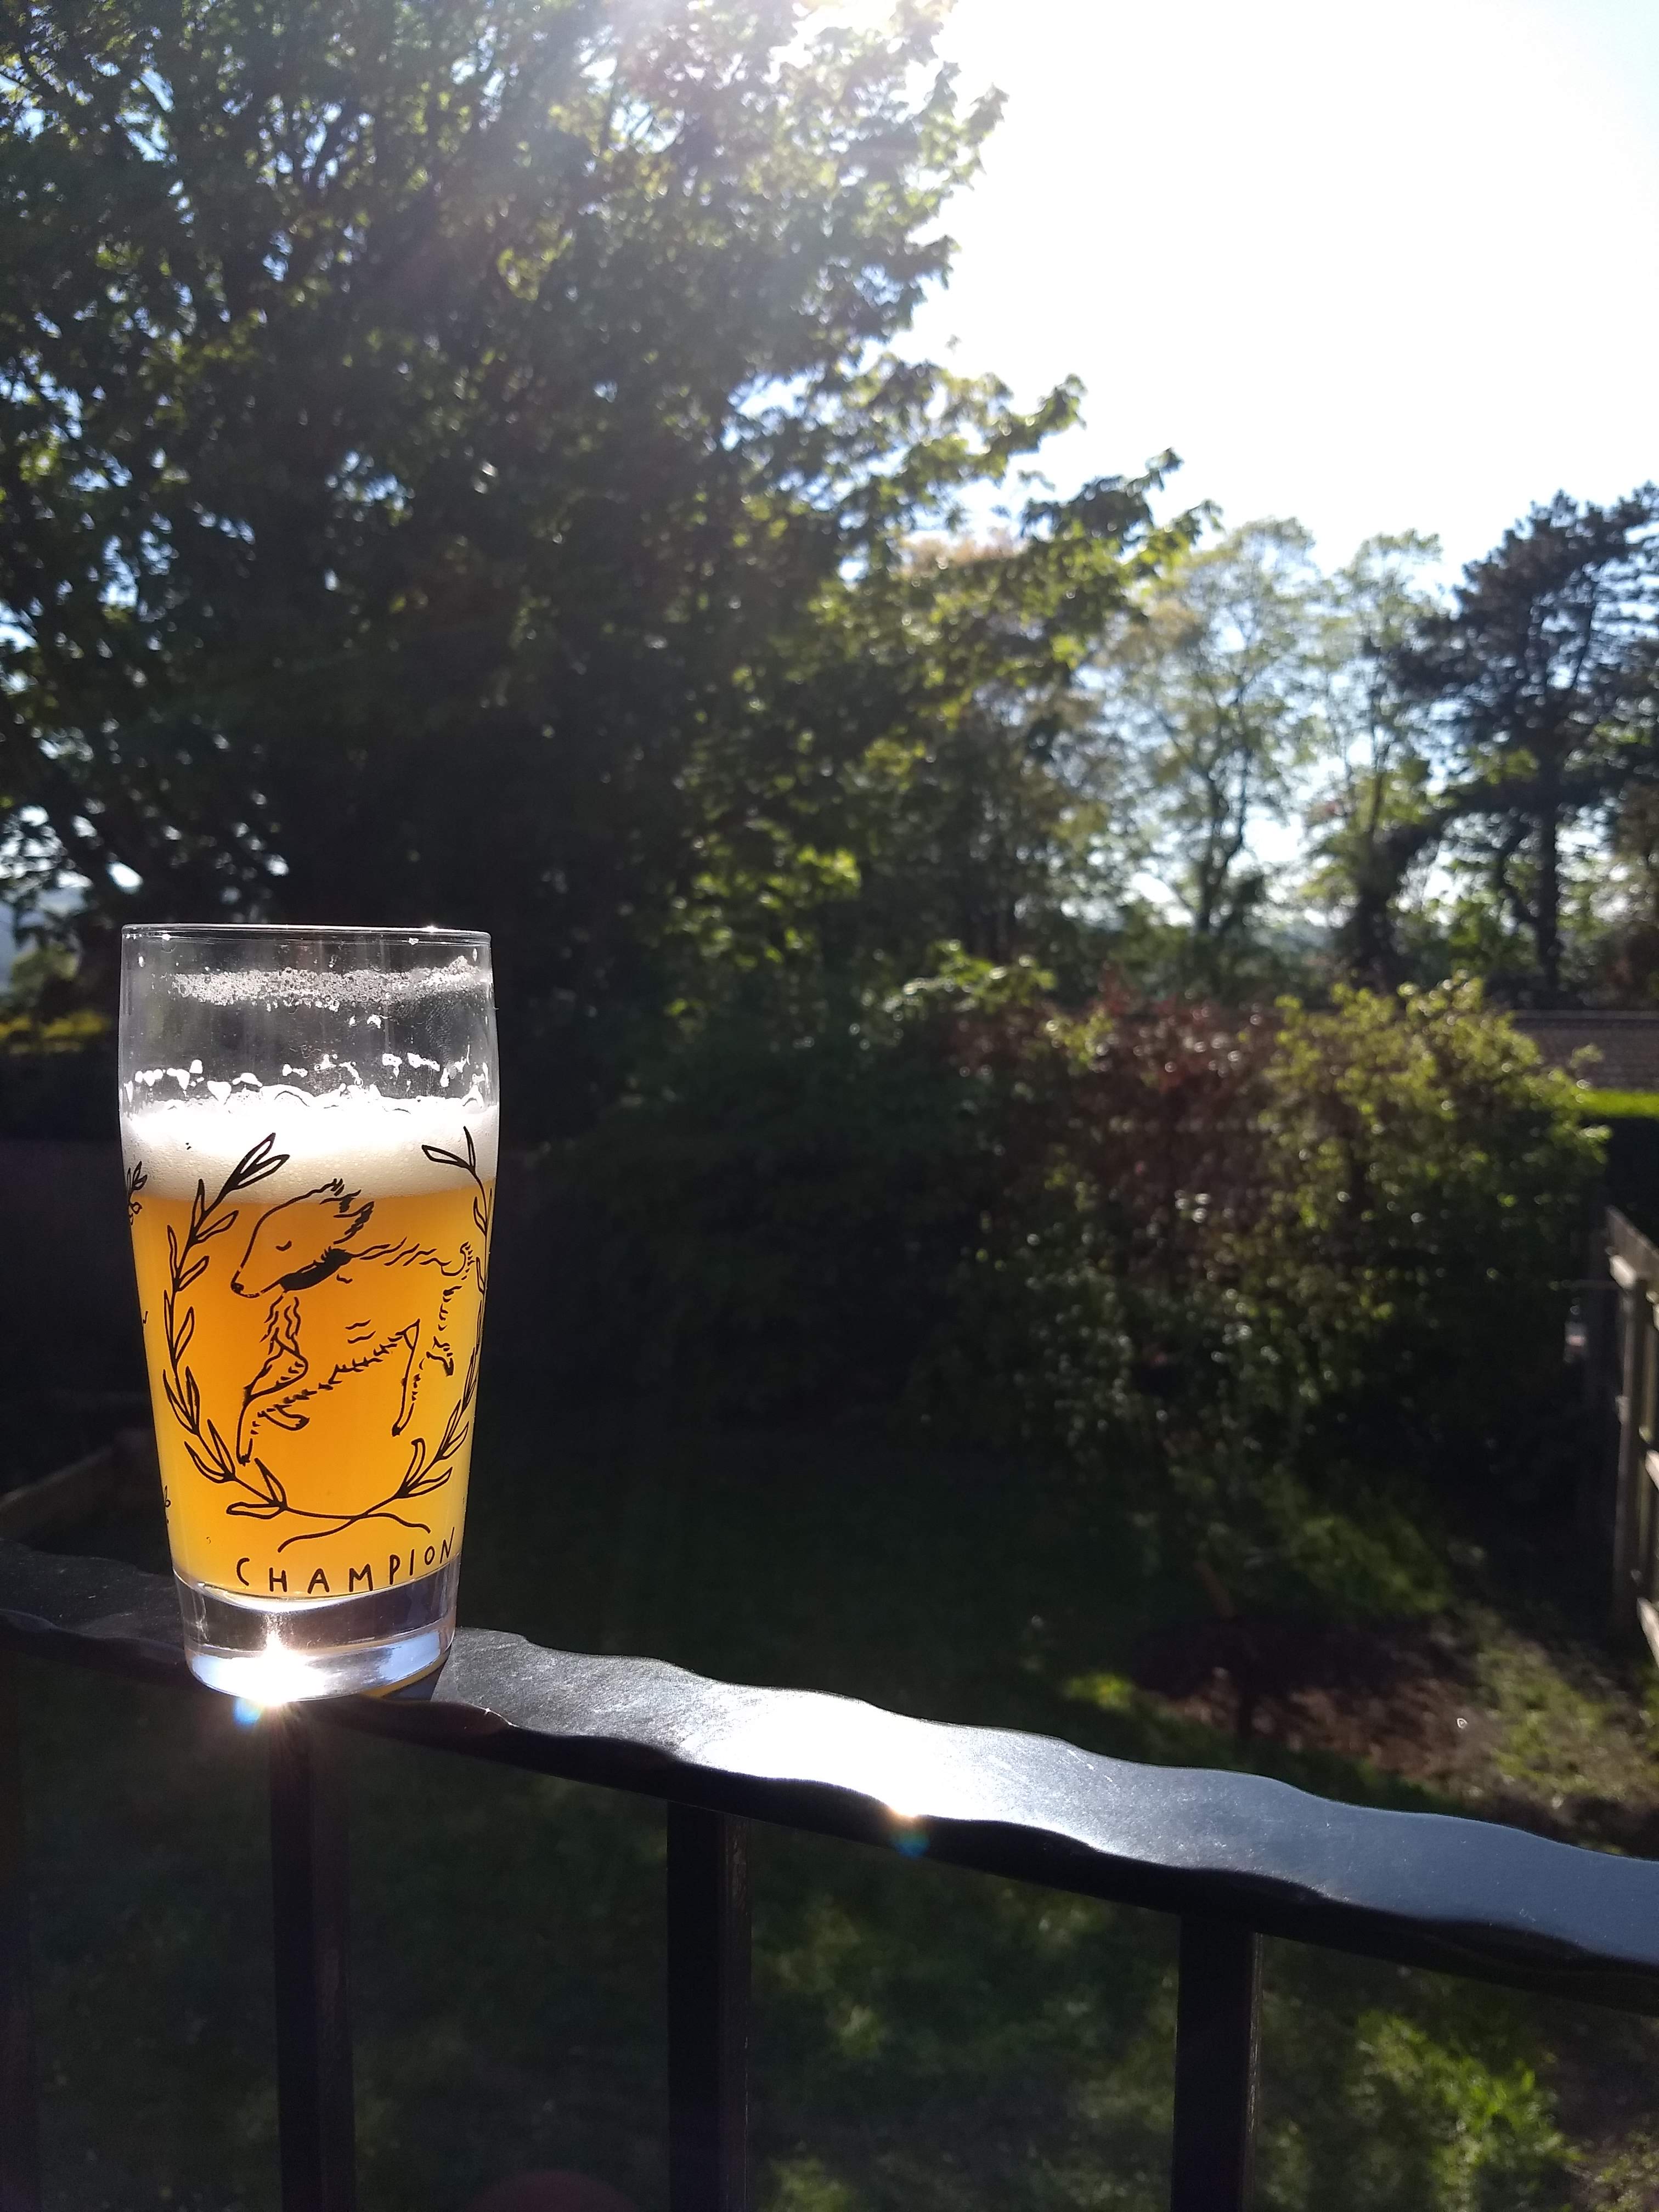 A glass of beer on a balcony in the sun